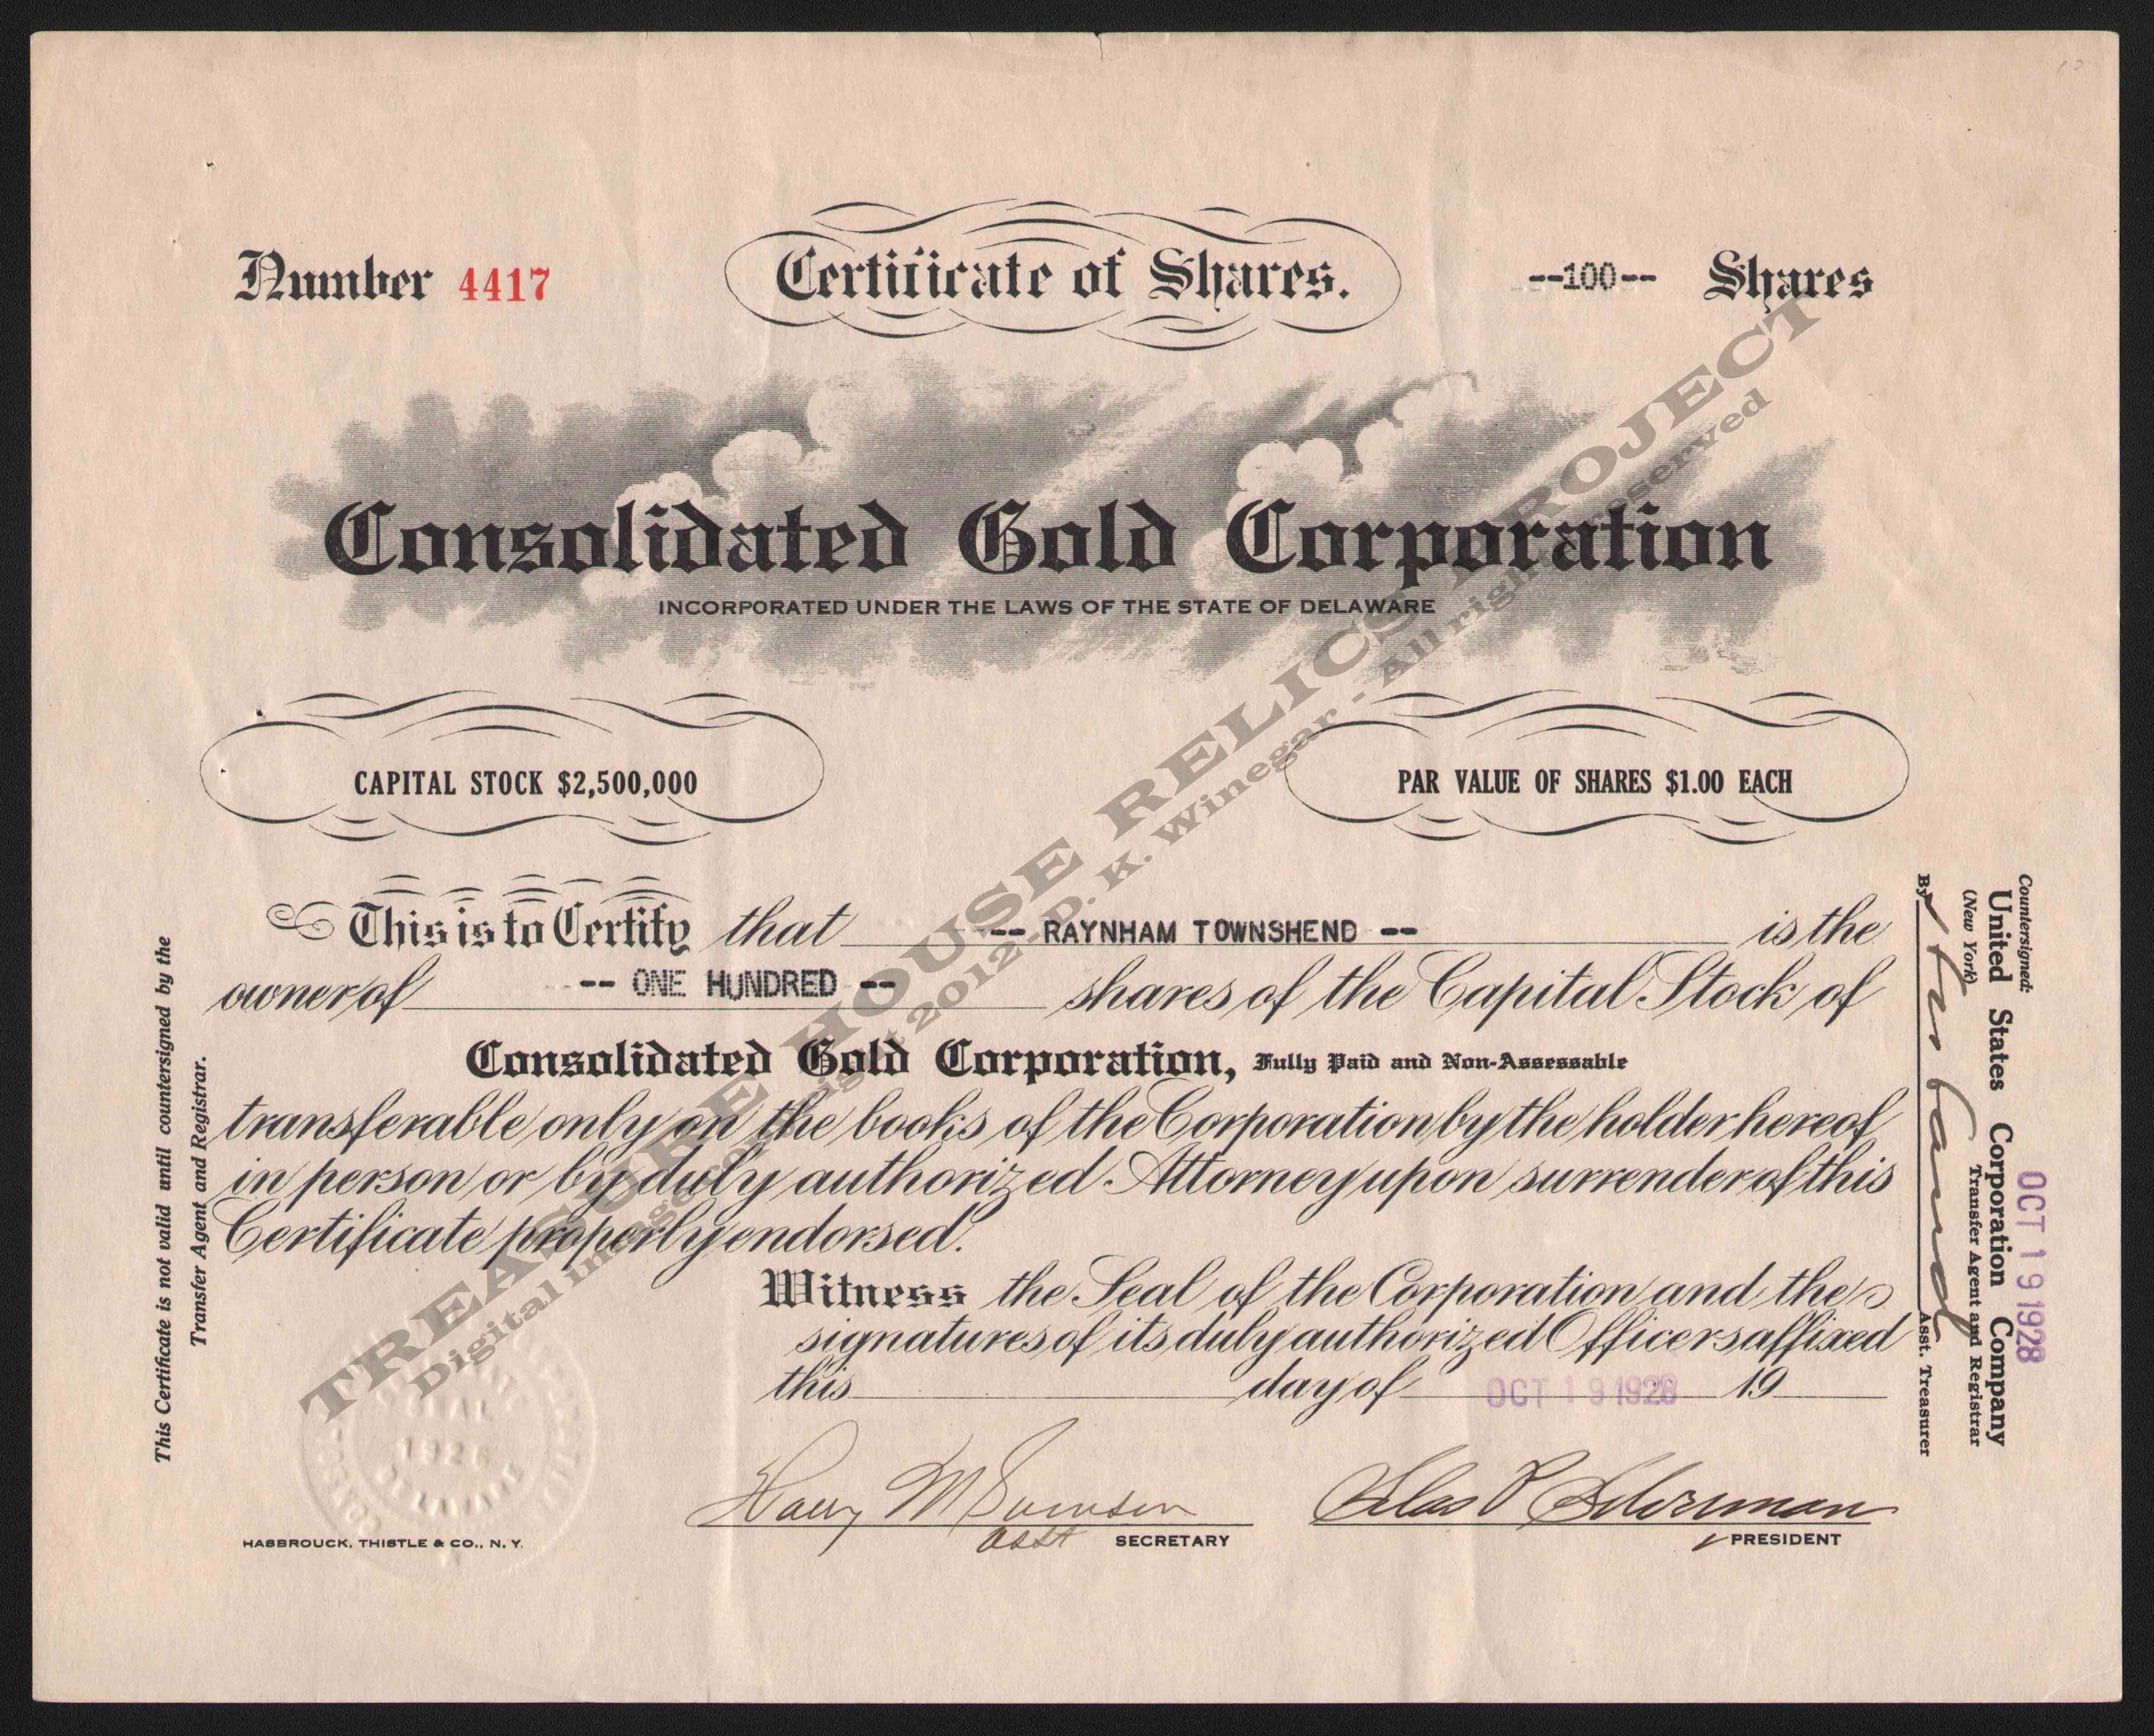 LETTERHEAD/ARCHIVE_16026_-_STOCK_-_CONSOLIDATED_GOLD_CORPORATION_4417_1928_400_CROP_EMBOSS.jpg